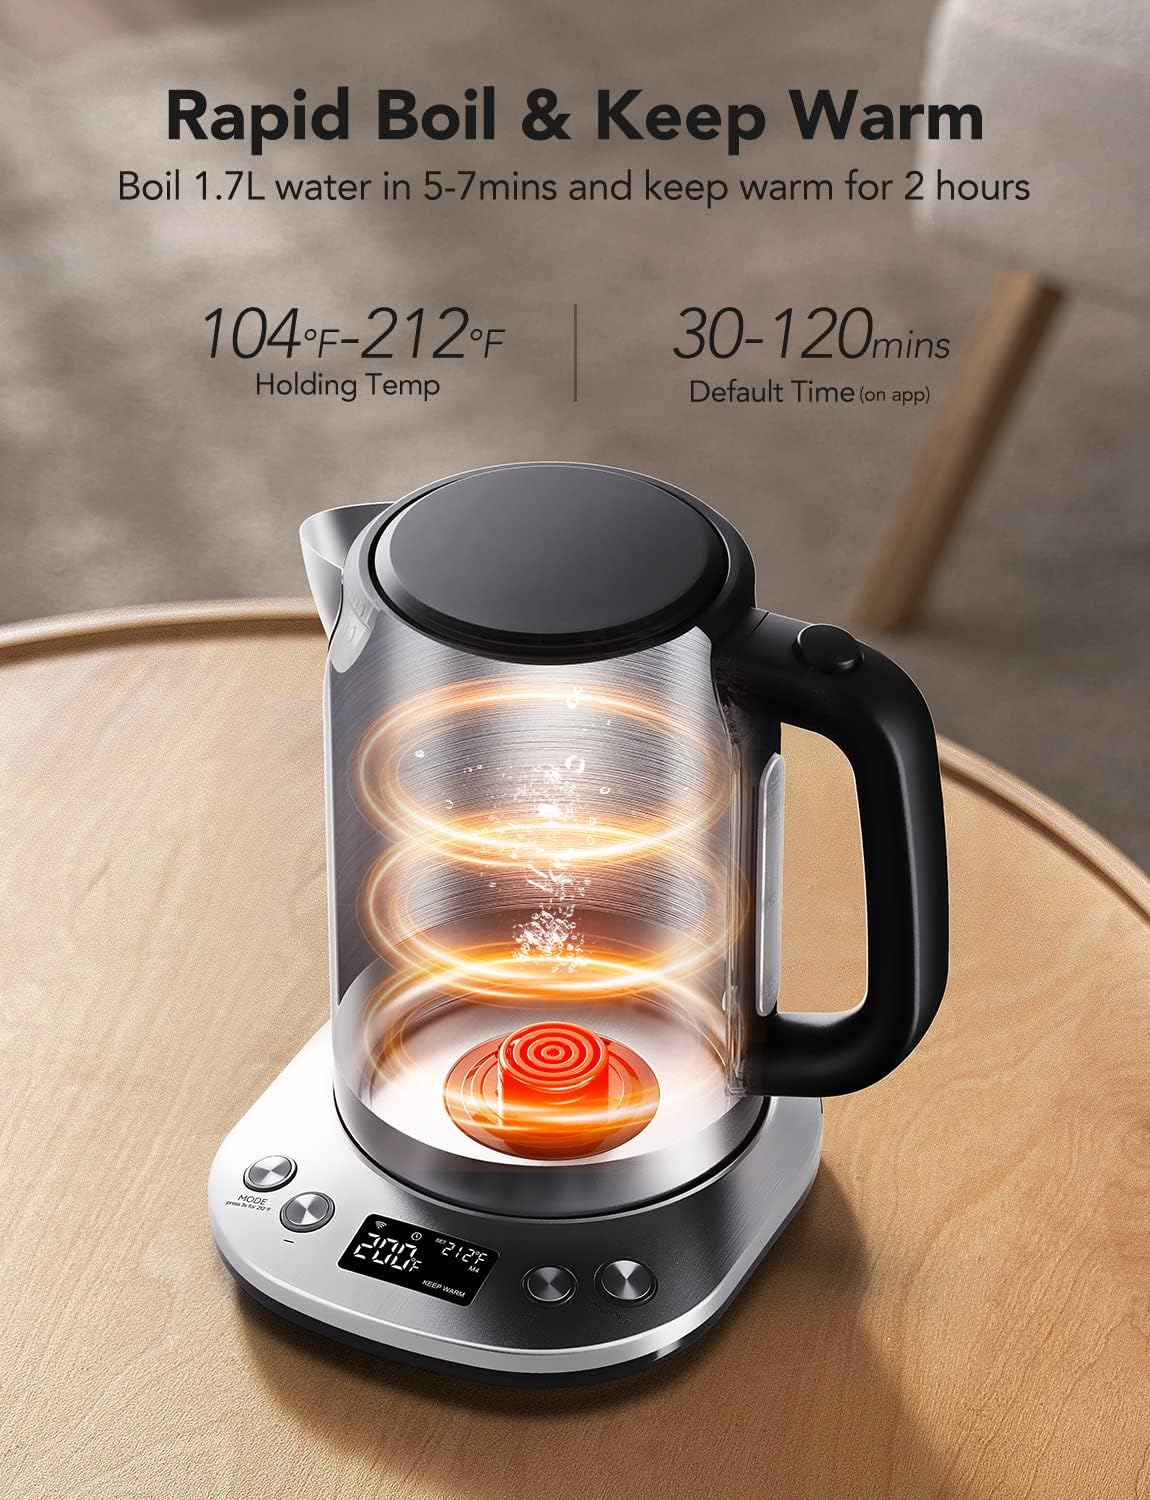 GoveeLife Smart Electric Kettle, 0.8L WiFi Gooseneck Kettle Compatible with Alexa, 5 Modes for Use, 3-Minute Fast Heating and 2H Keep Warm, Auto-Shut